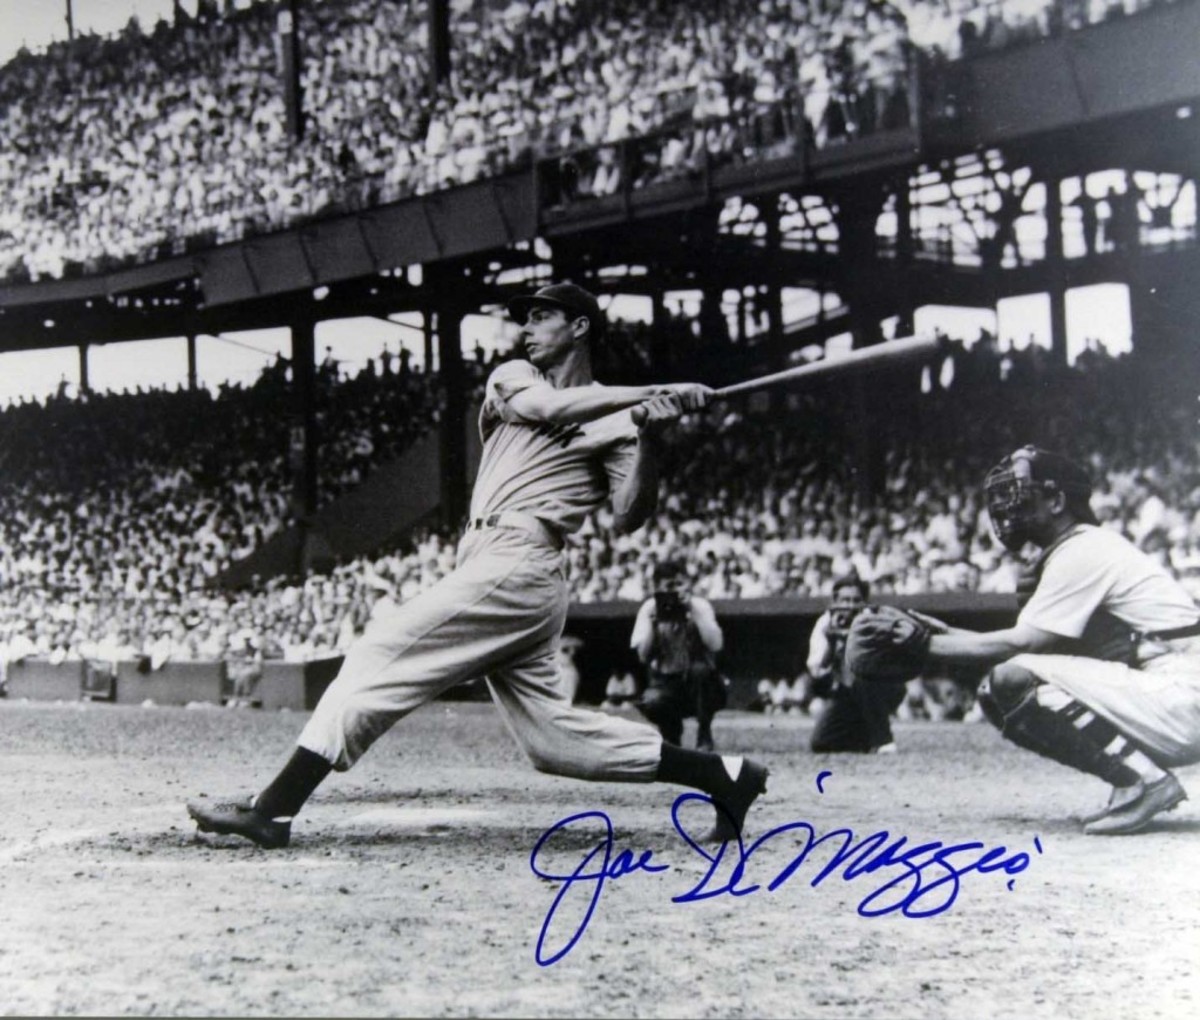 A classic shot of the great Joe DiMaggio in action. The only thing that’s wrong is the signature is a fake.